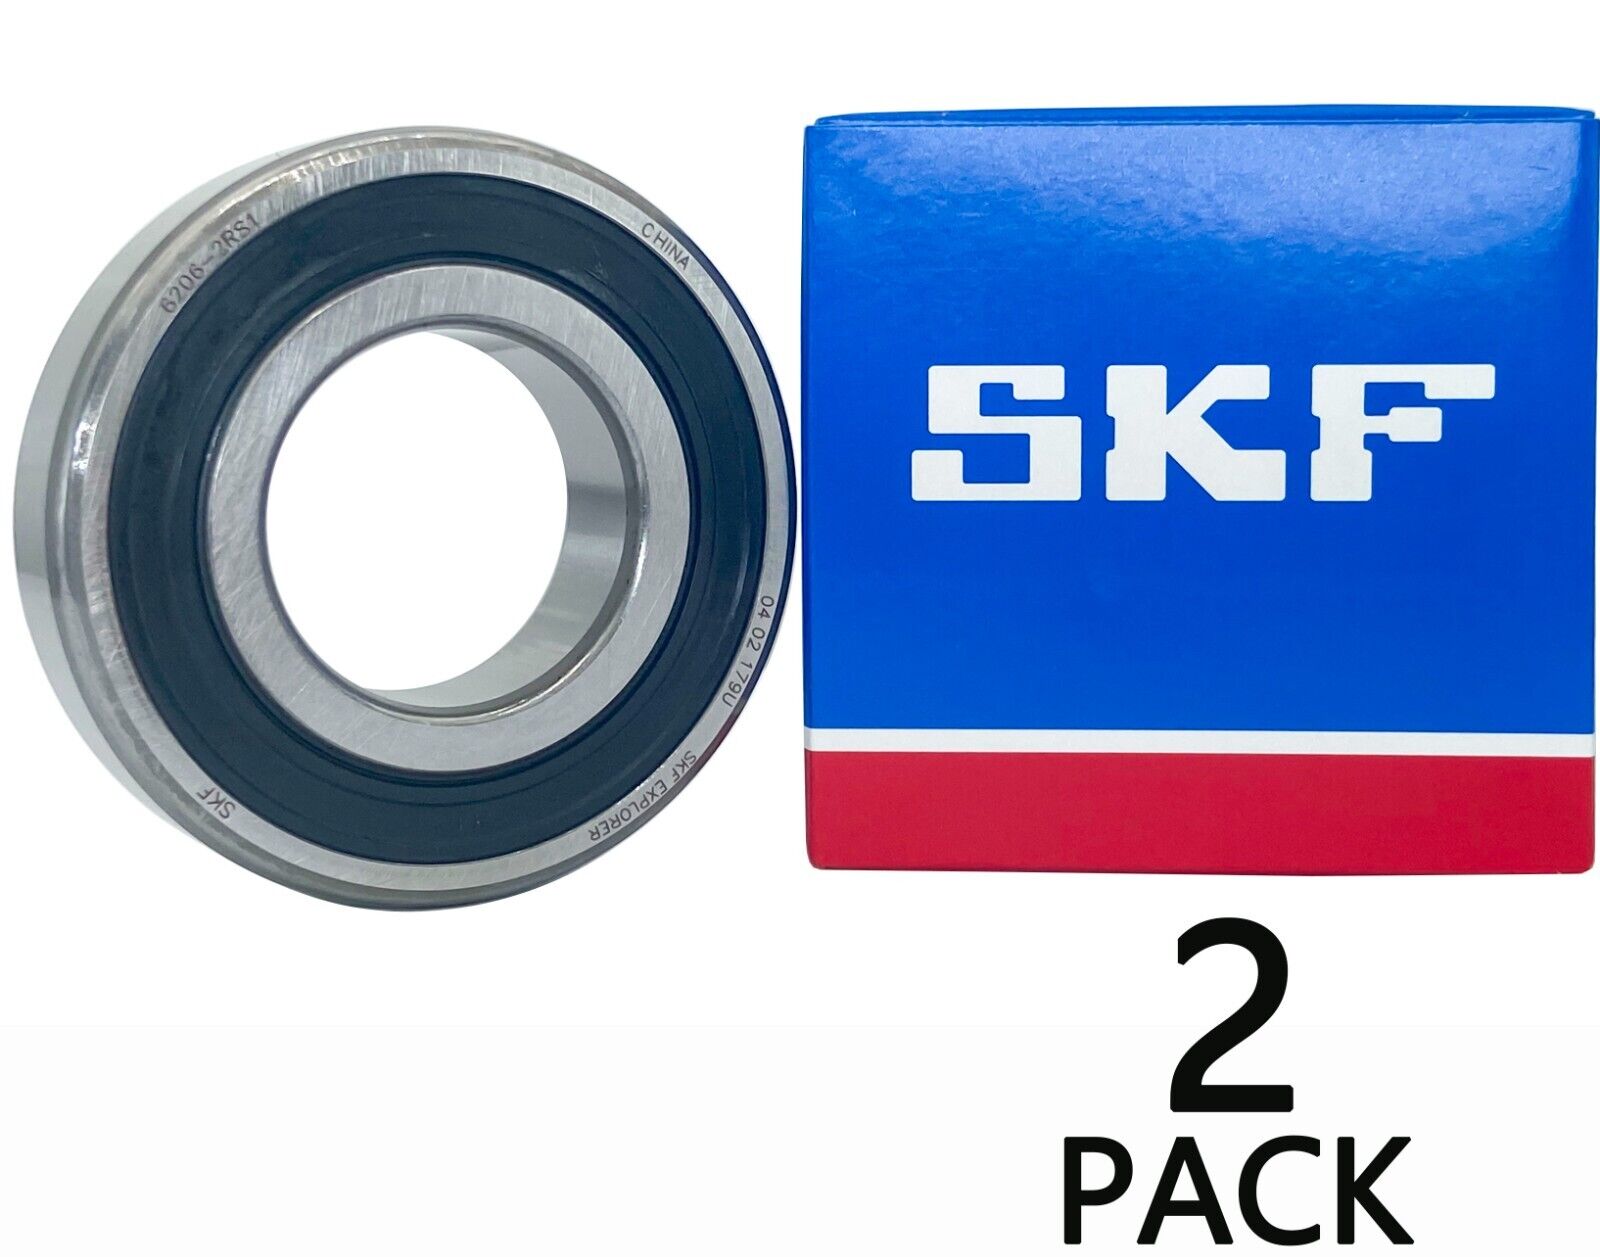 2PACK SKF 6206-2RS1 30X62X16MM Normal Clearance Double Rubber Seal Ball Bearings